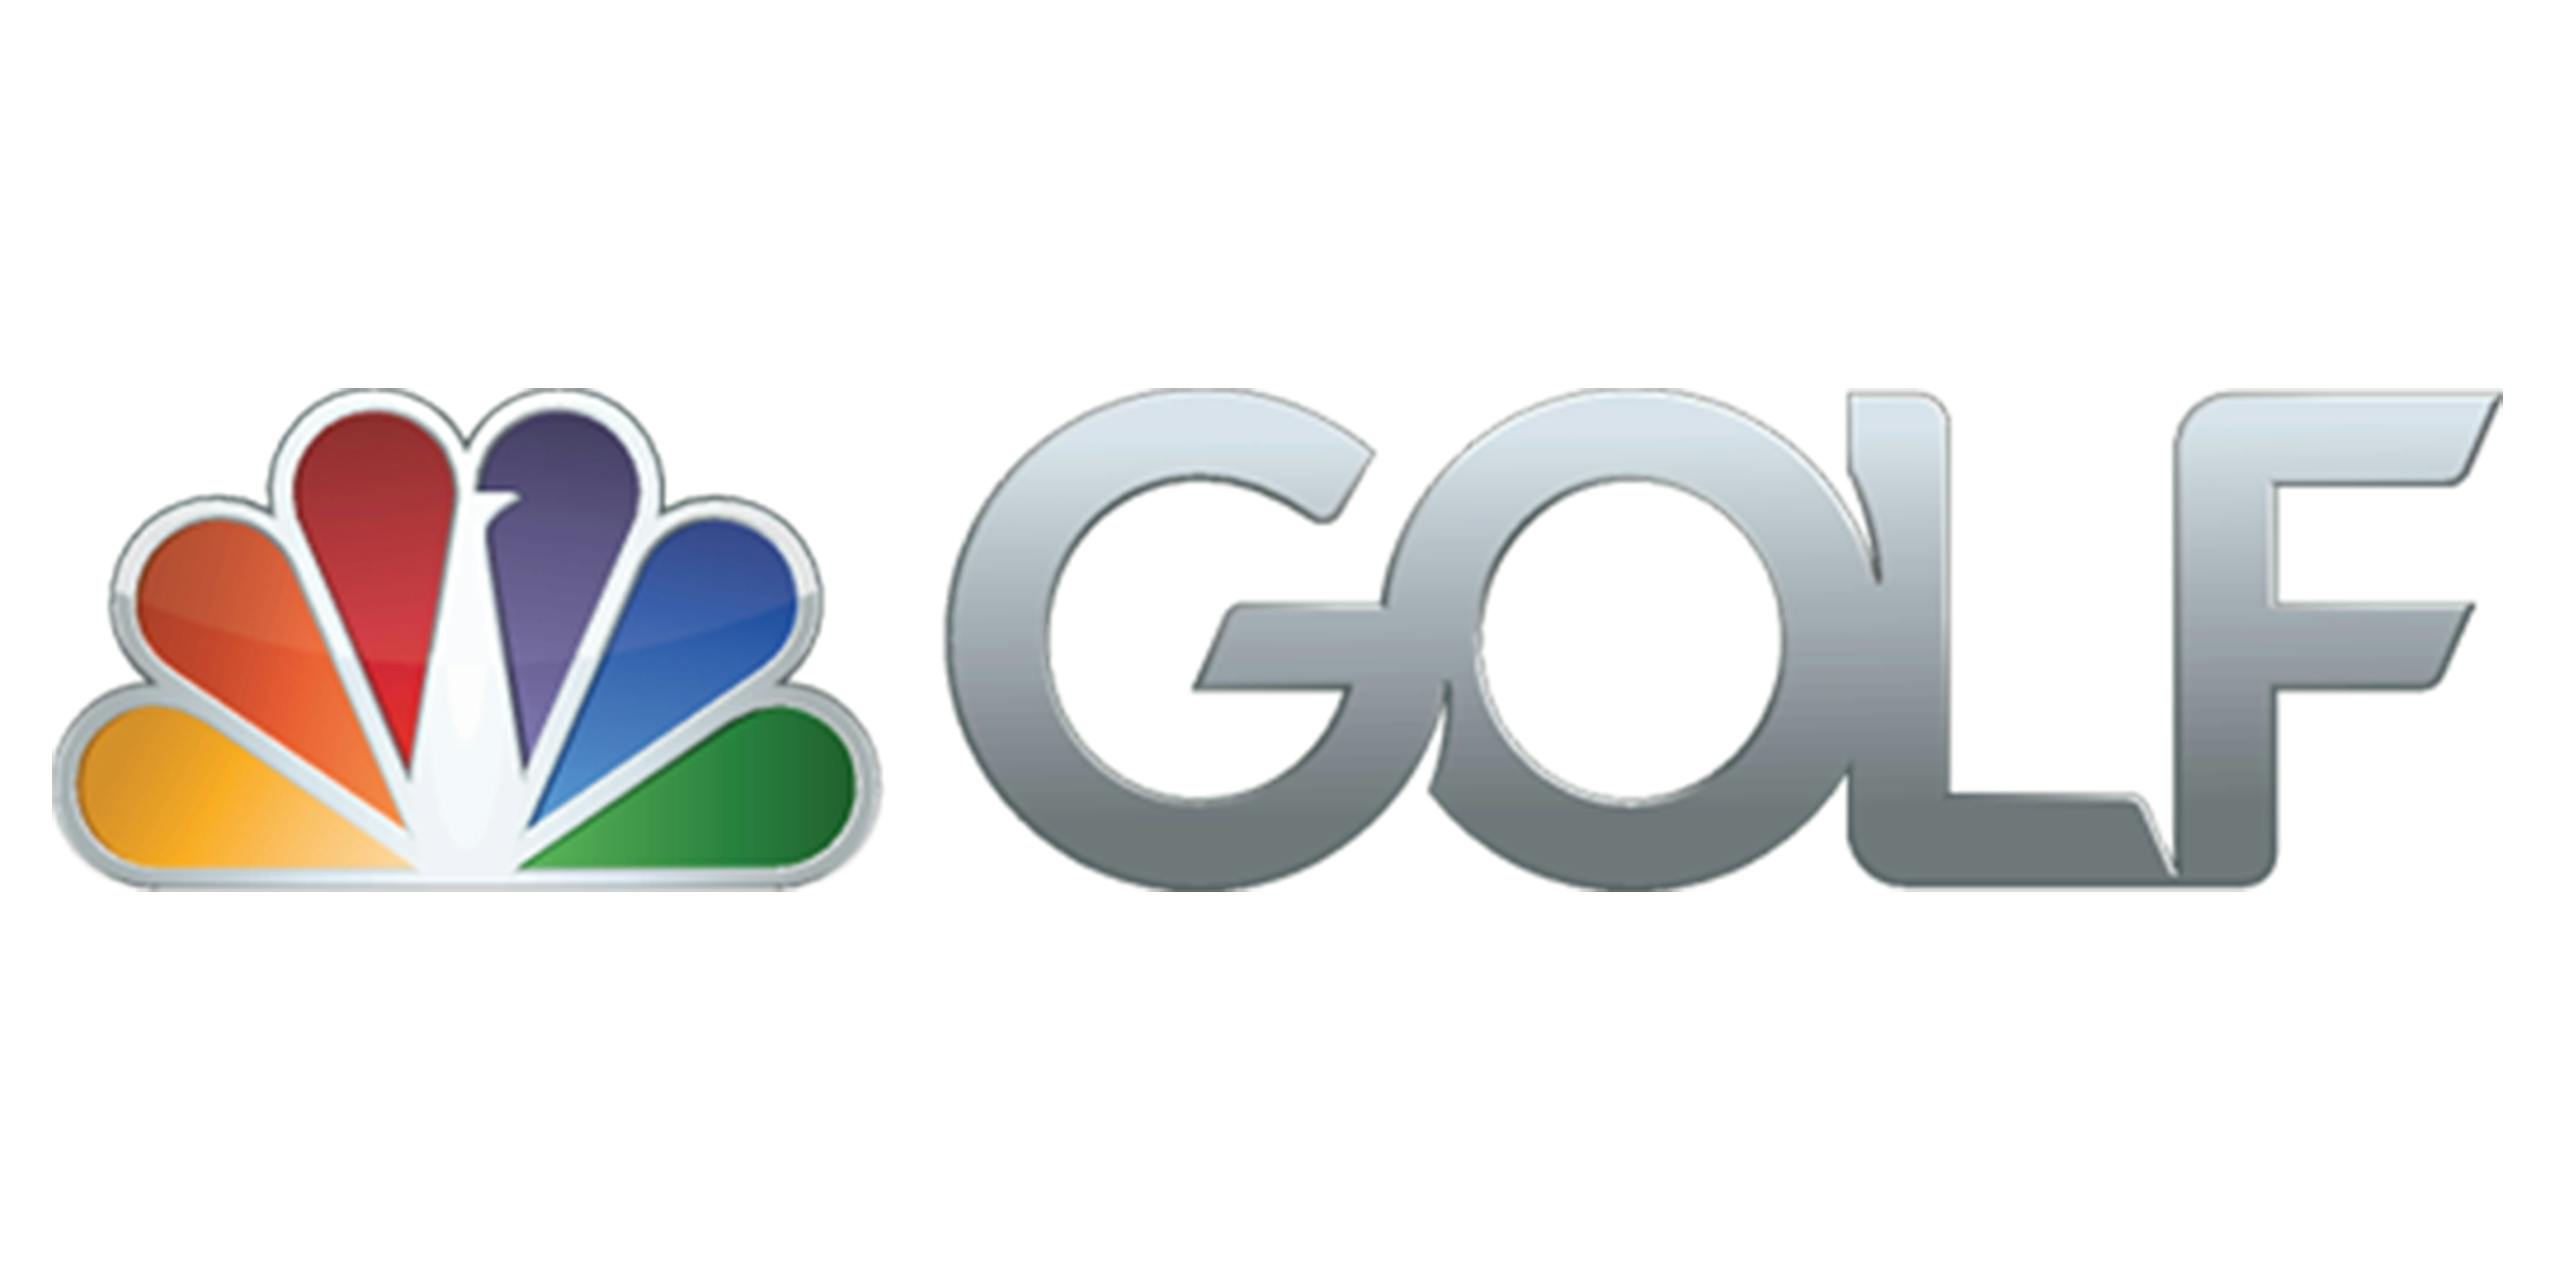 is golf channel owned by pga tour